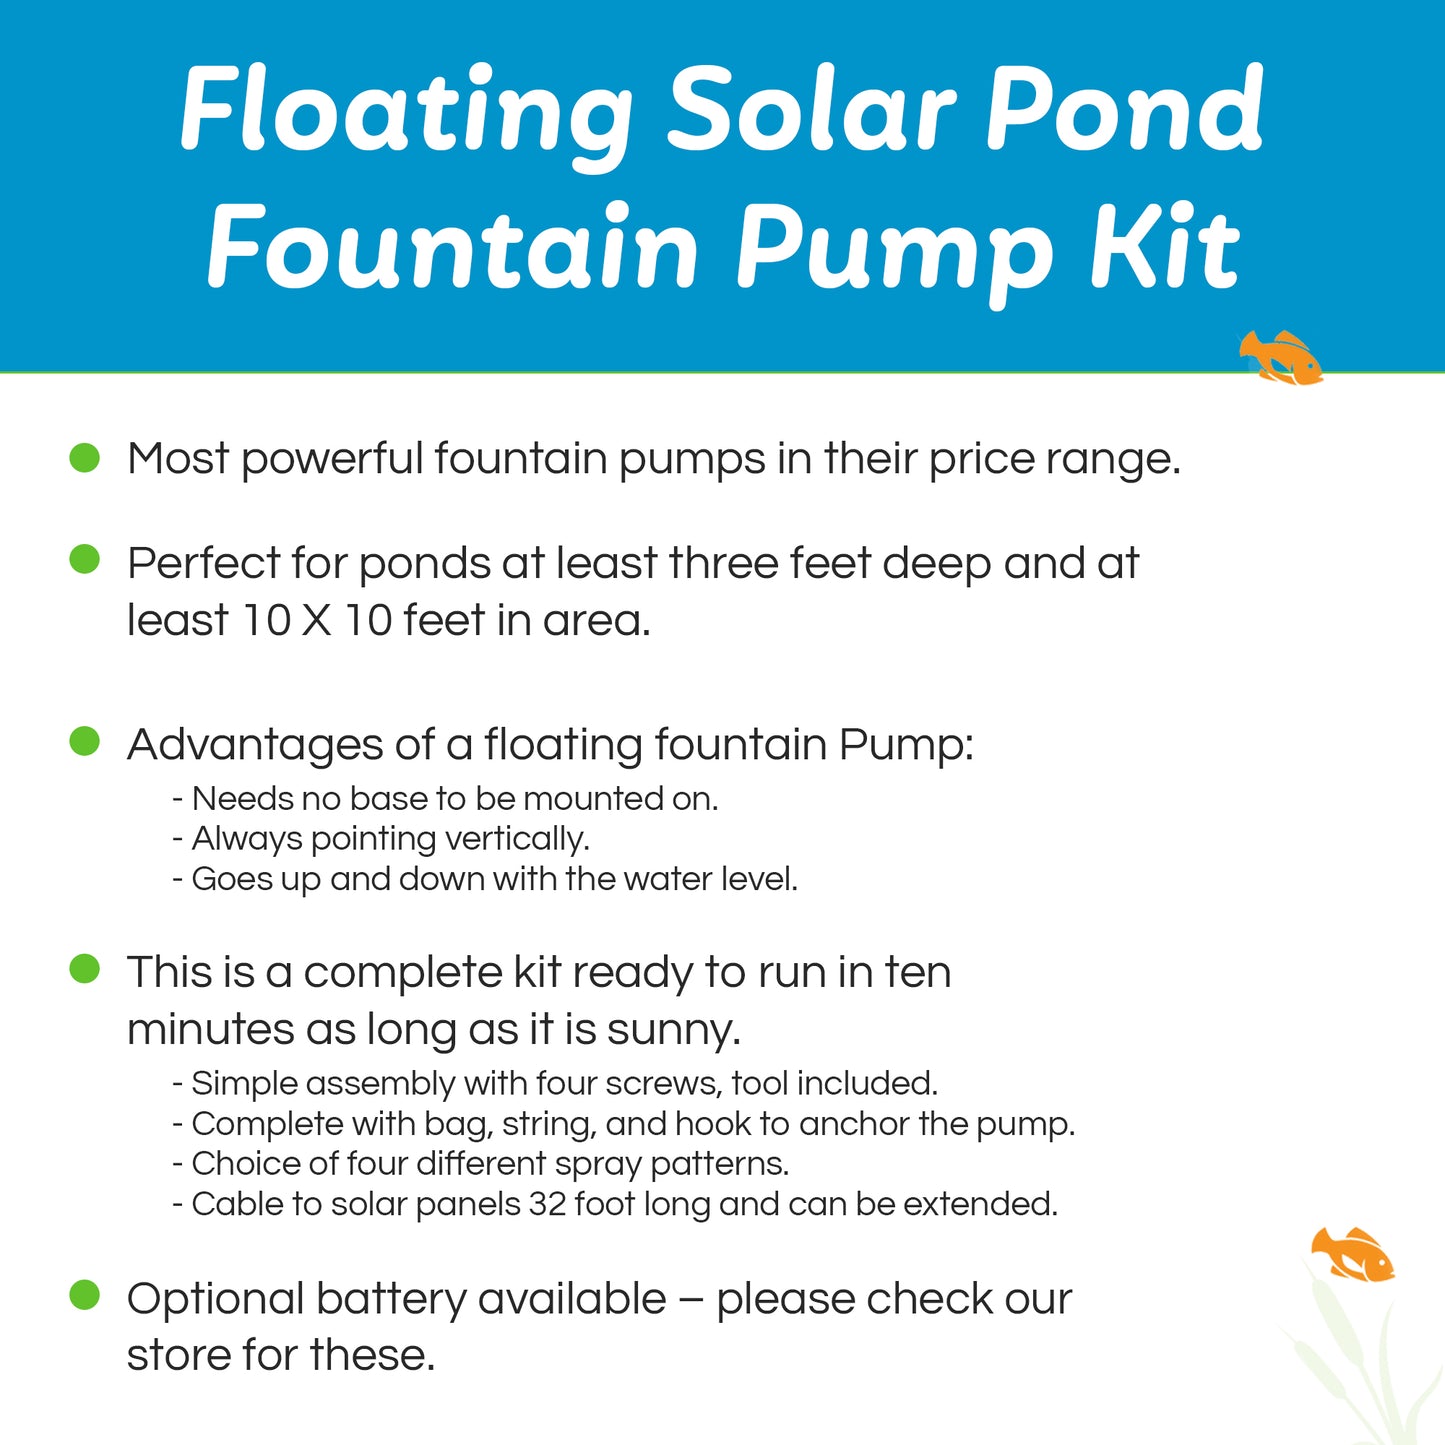 Floating Solar Pond Fountain Pump two models 50W and 100W